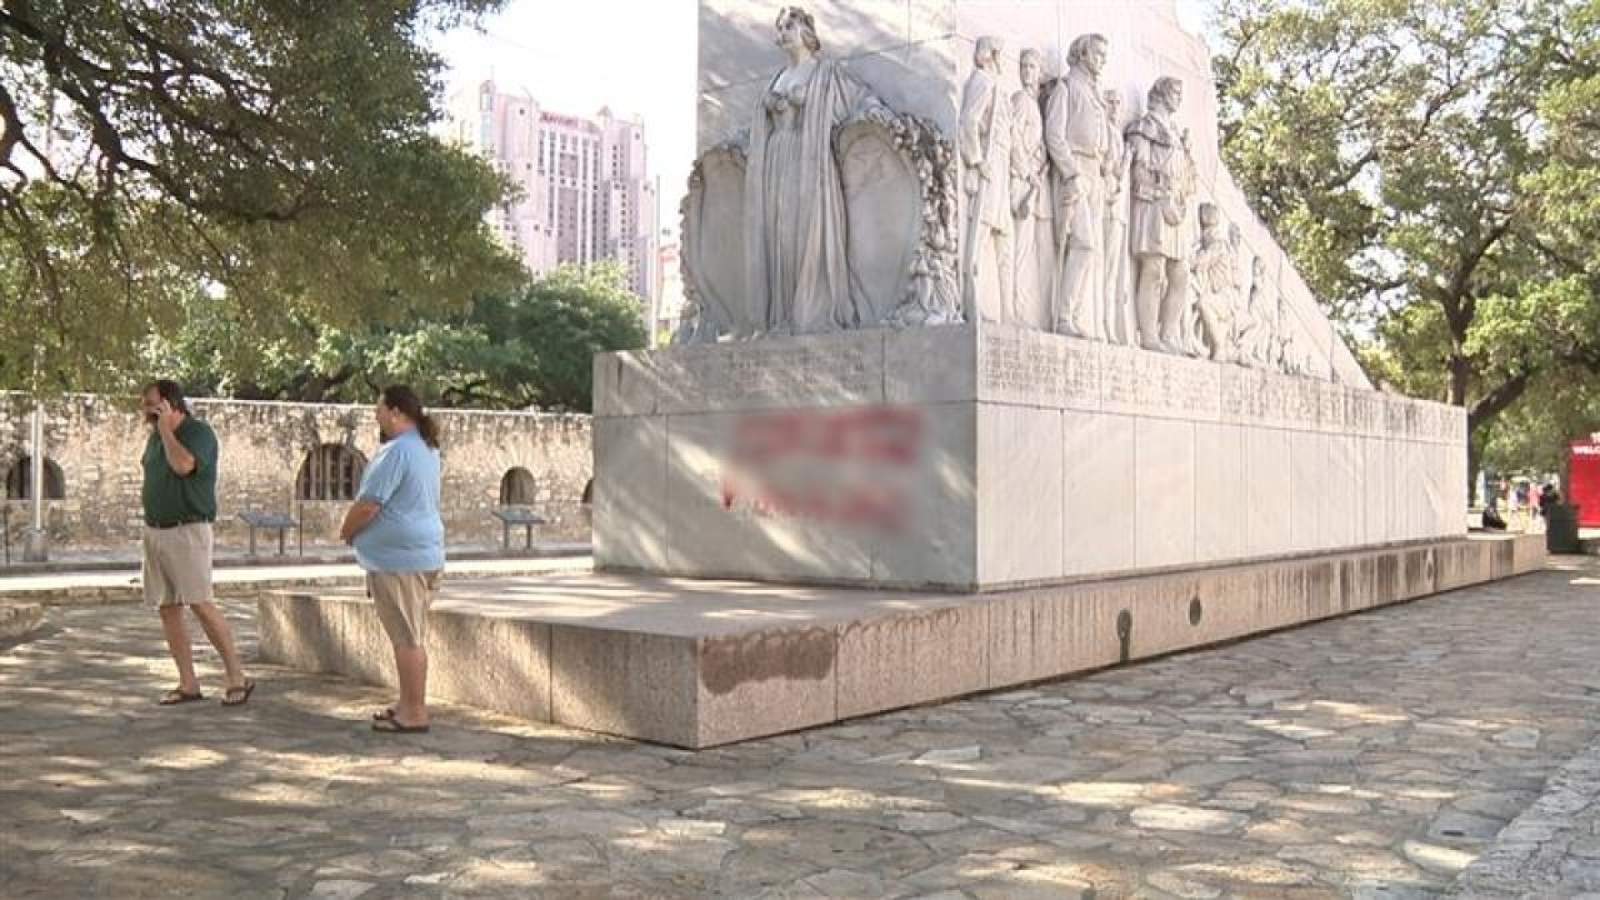 Spray-painted messages on Alamo’s Cenotaph have people seeing red